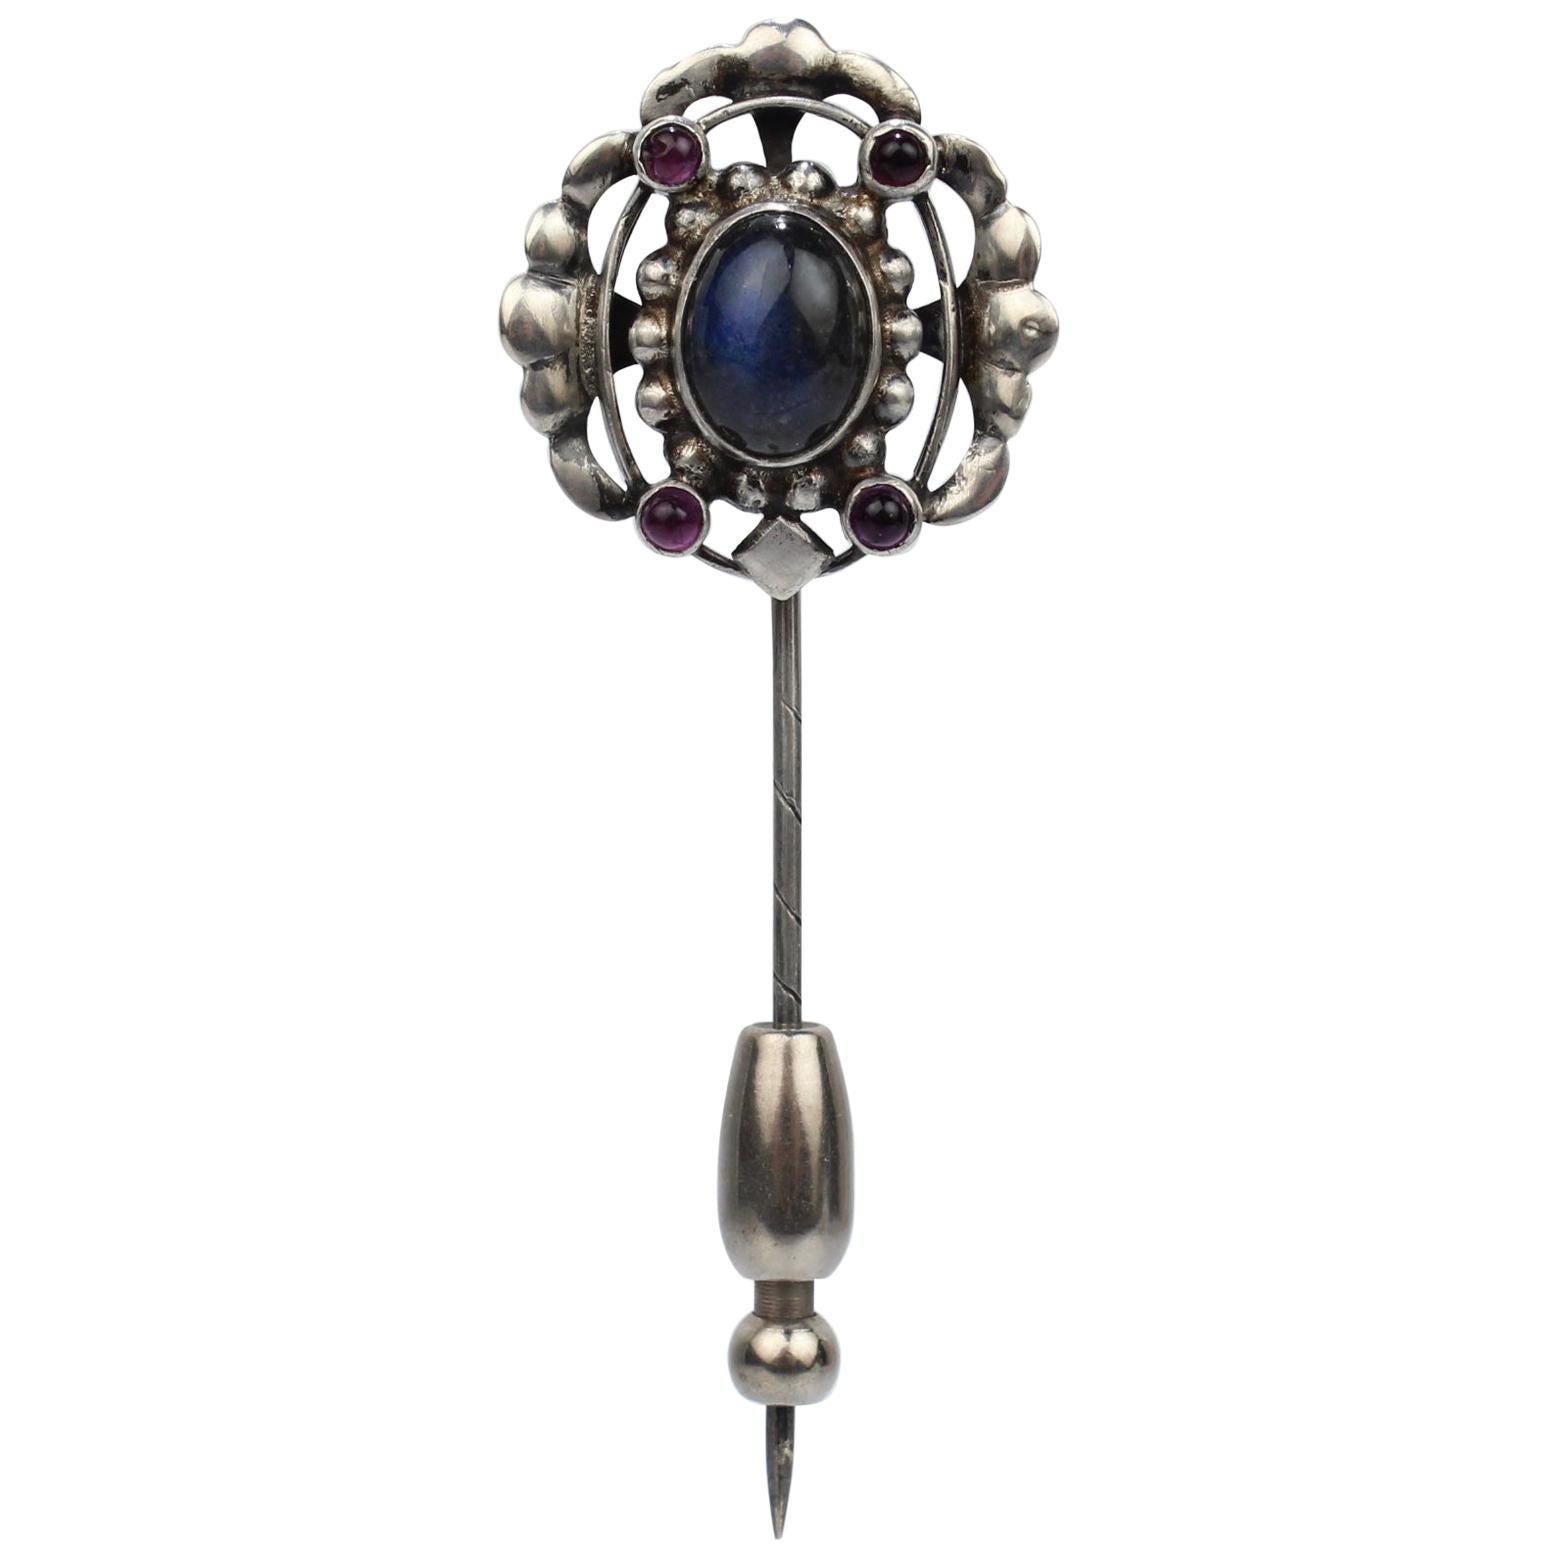 Art Deco Georg Jensen 830 Silver Stick Pin No. 17 with Labradorite and Amethysts